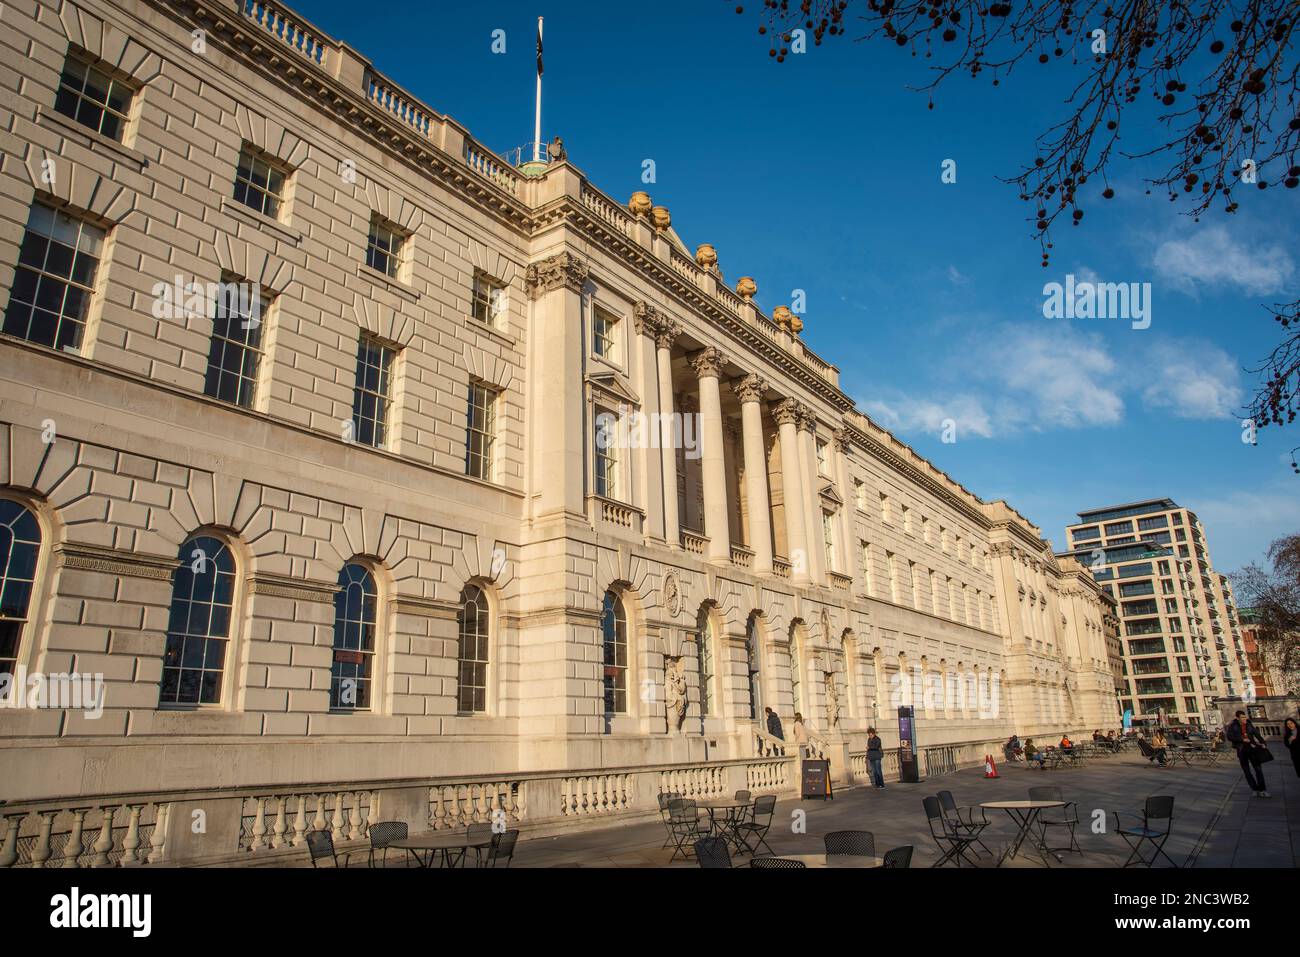 Somerset House situated between The Strand and The Embankment of the River Thames, London, UK Stock Photo